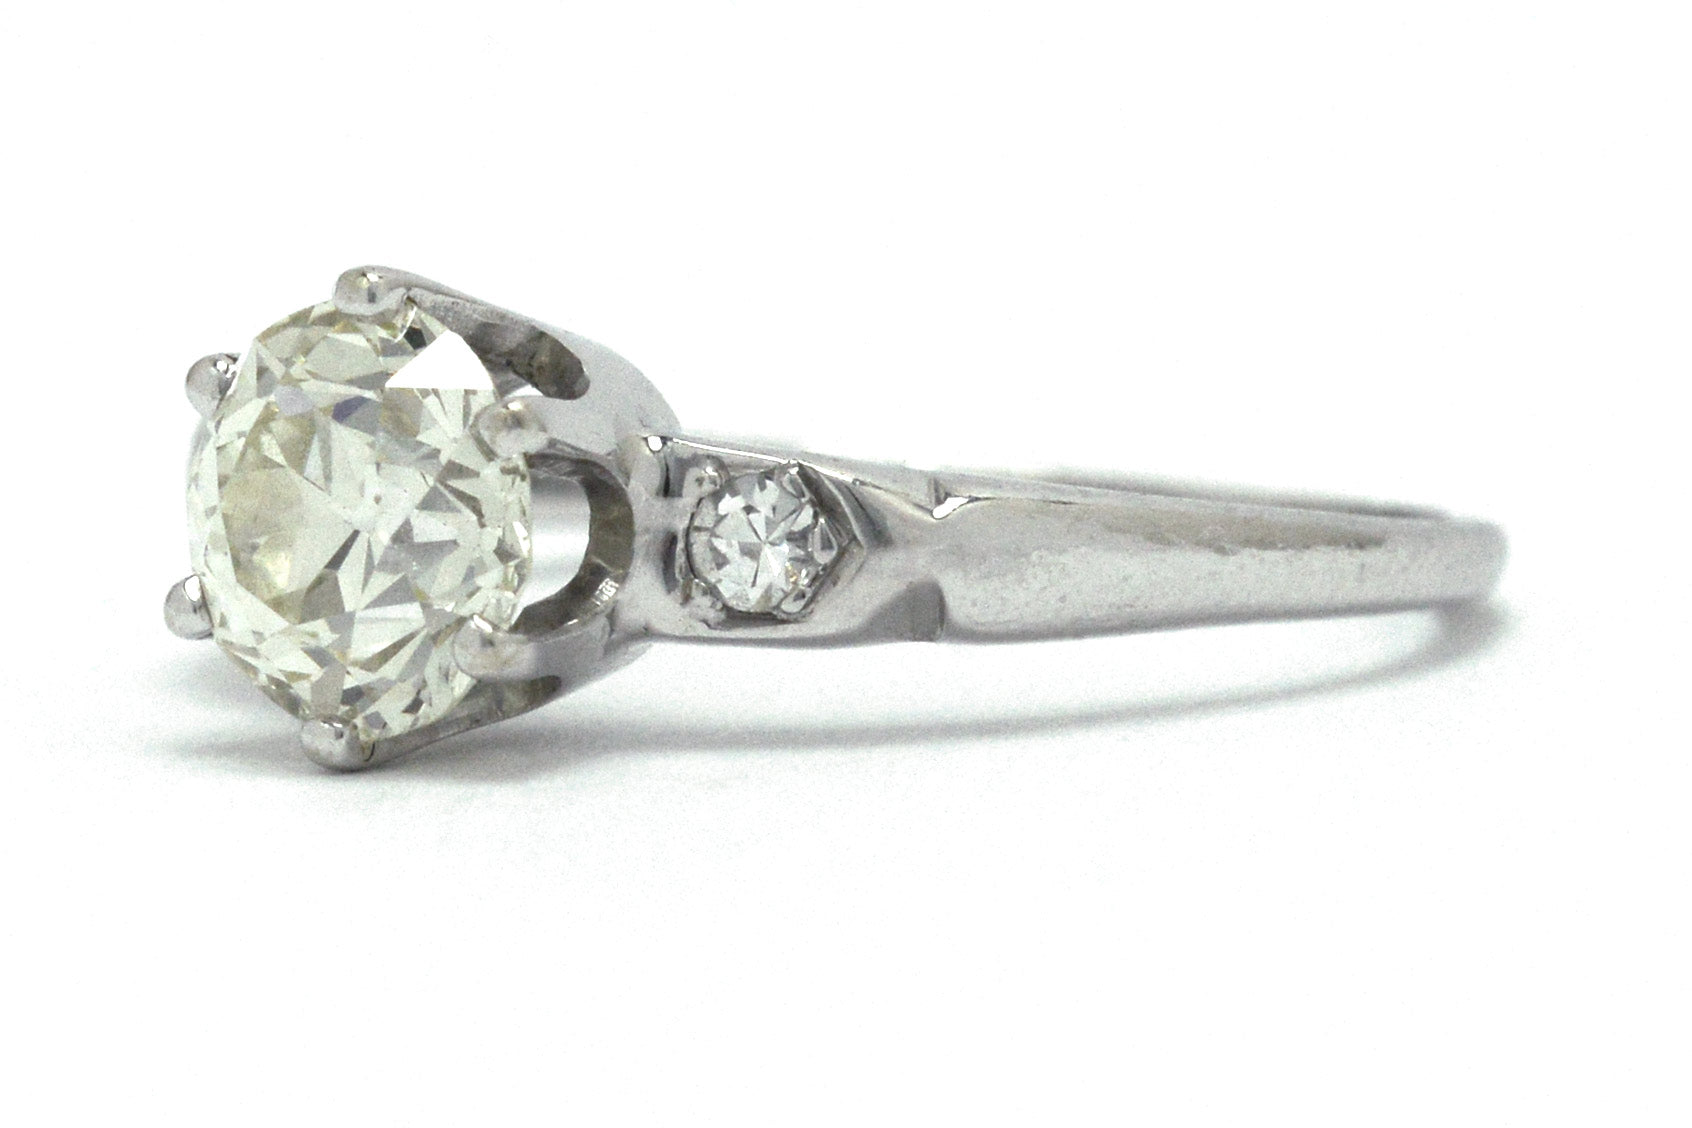 A Tiffany style solitaire engagement ring with a slightly yellow diamond.